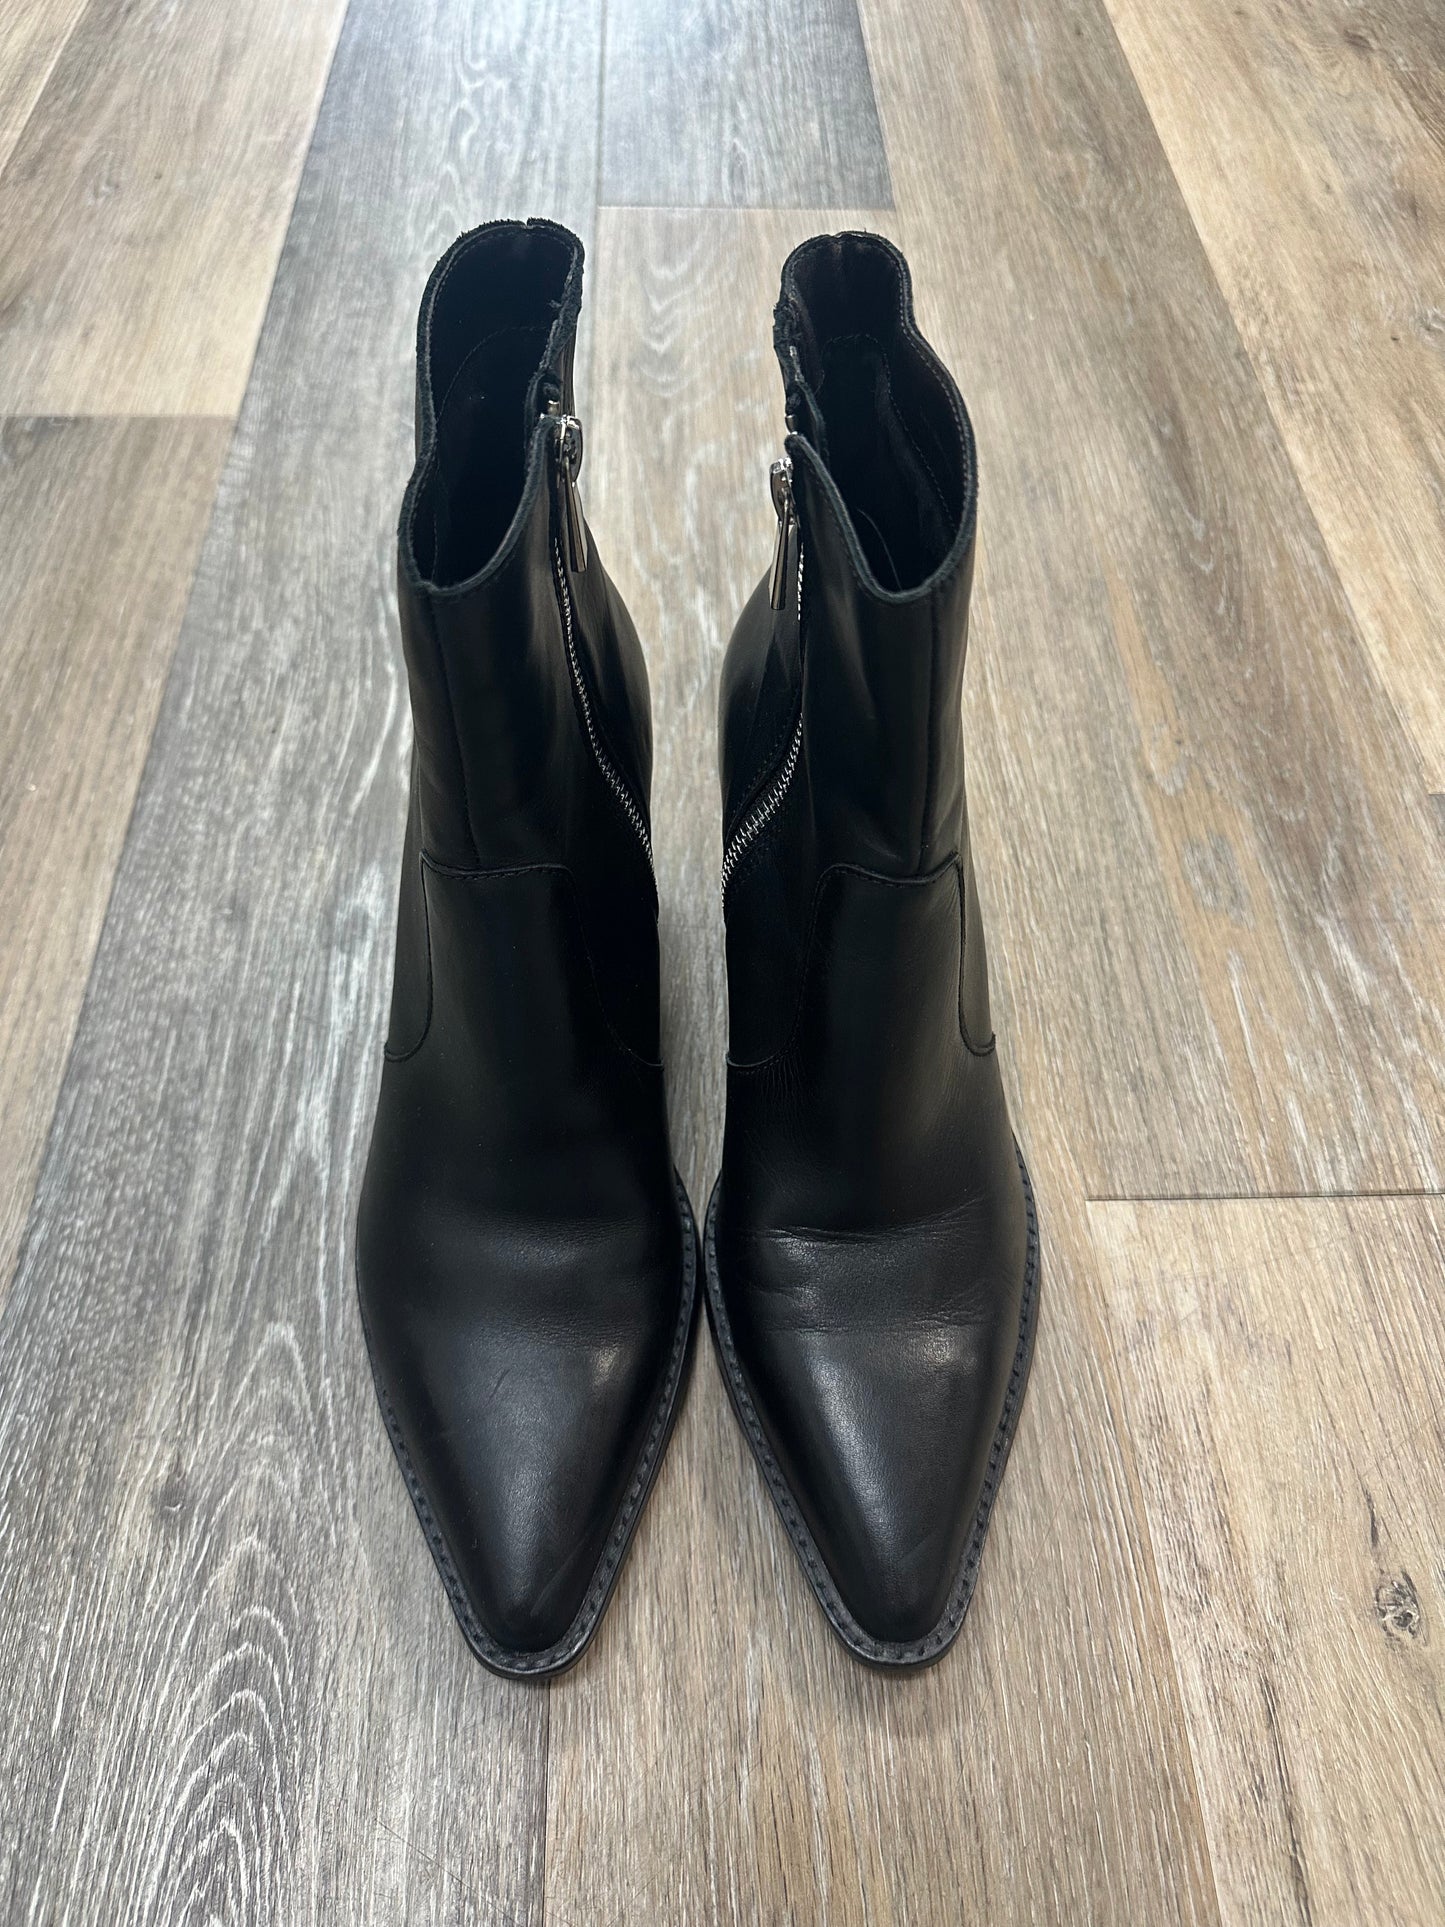 Boots Ankle Heels By Dolce Vita  Size: 9